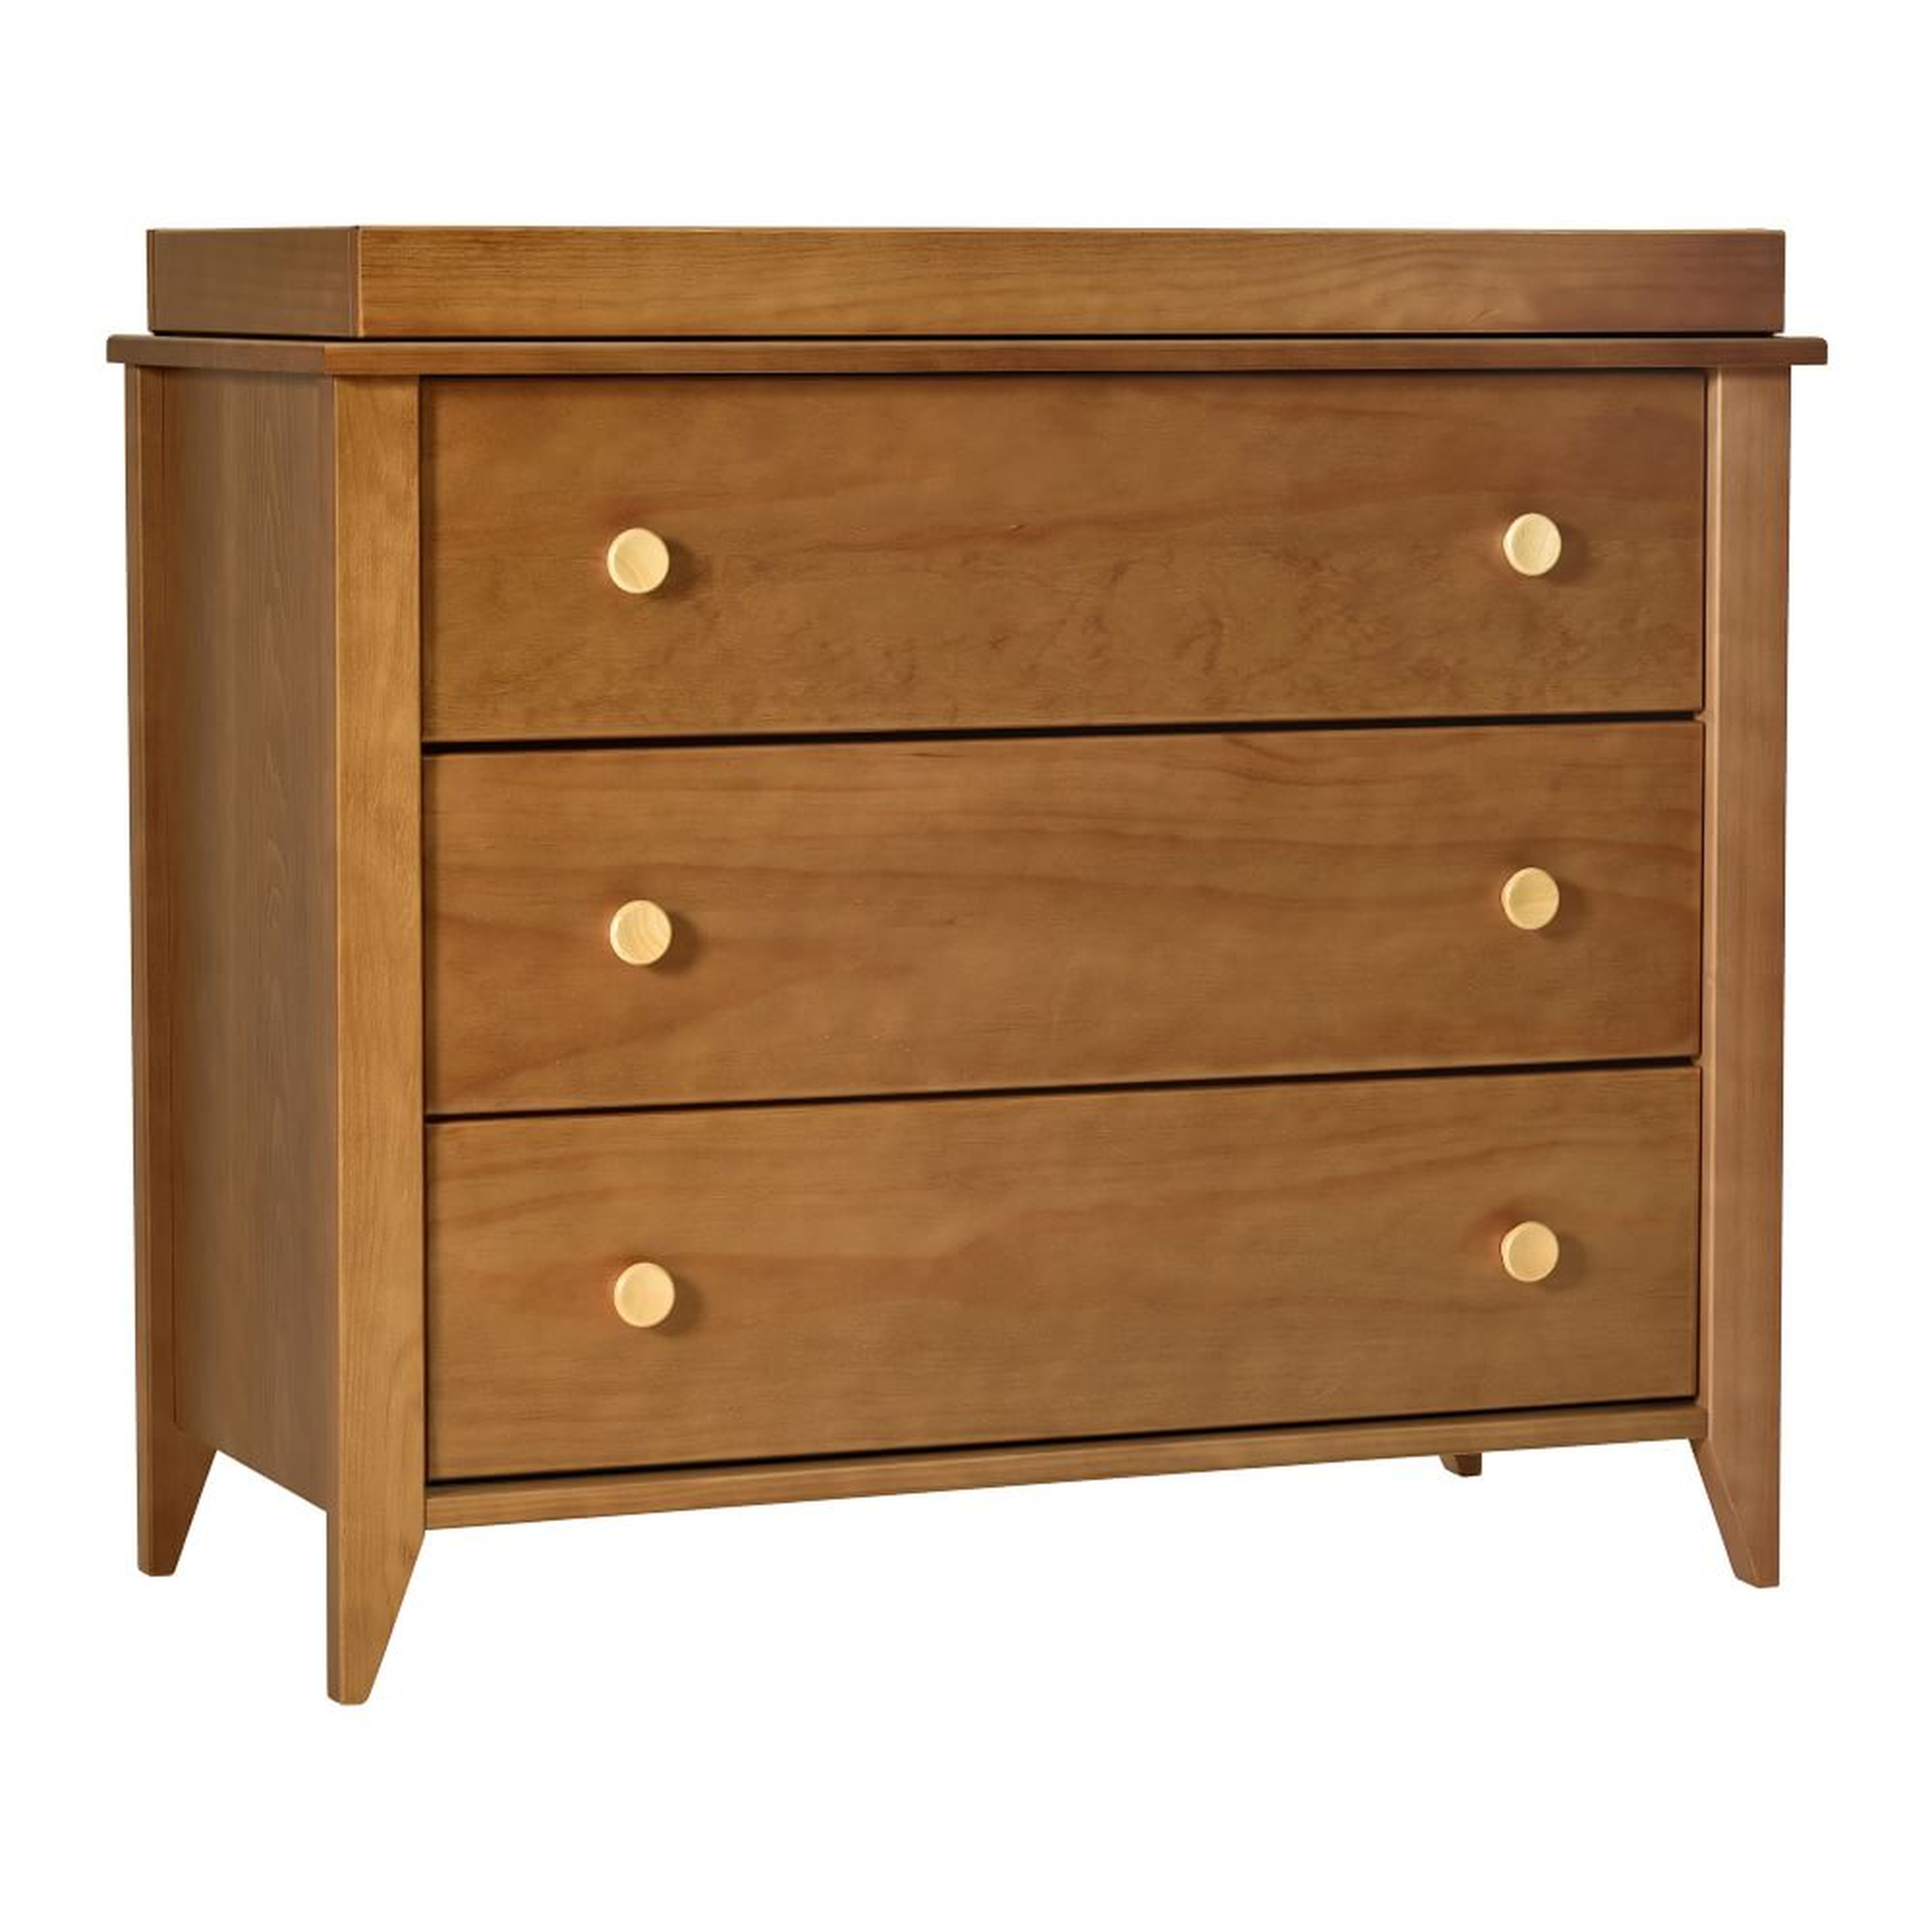 Sprout 3-Drawer Dresser with Removable Changing Tray, Chestnut/Natural, WE Kids - West Elm